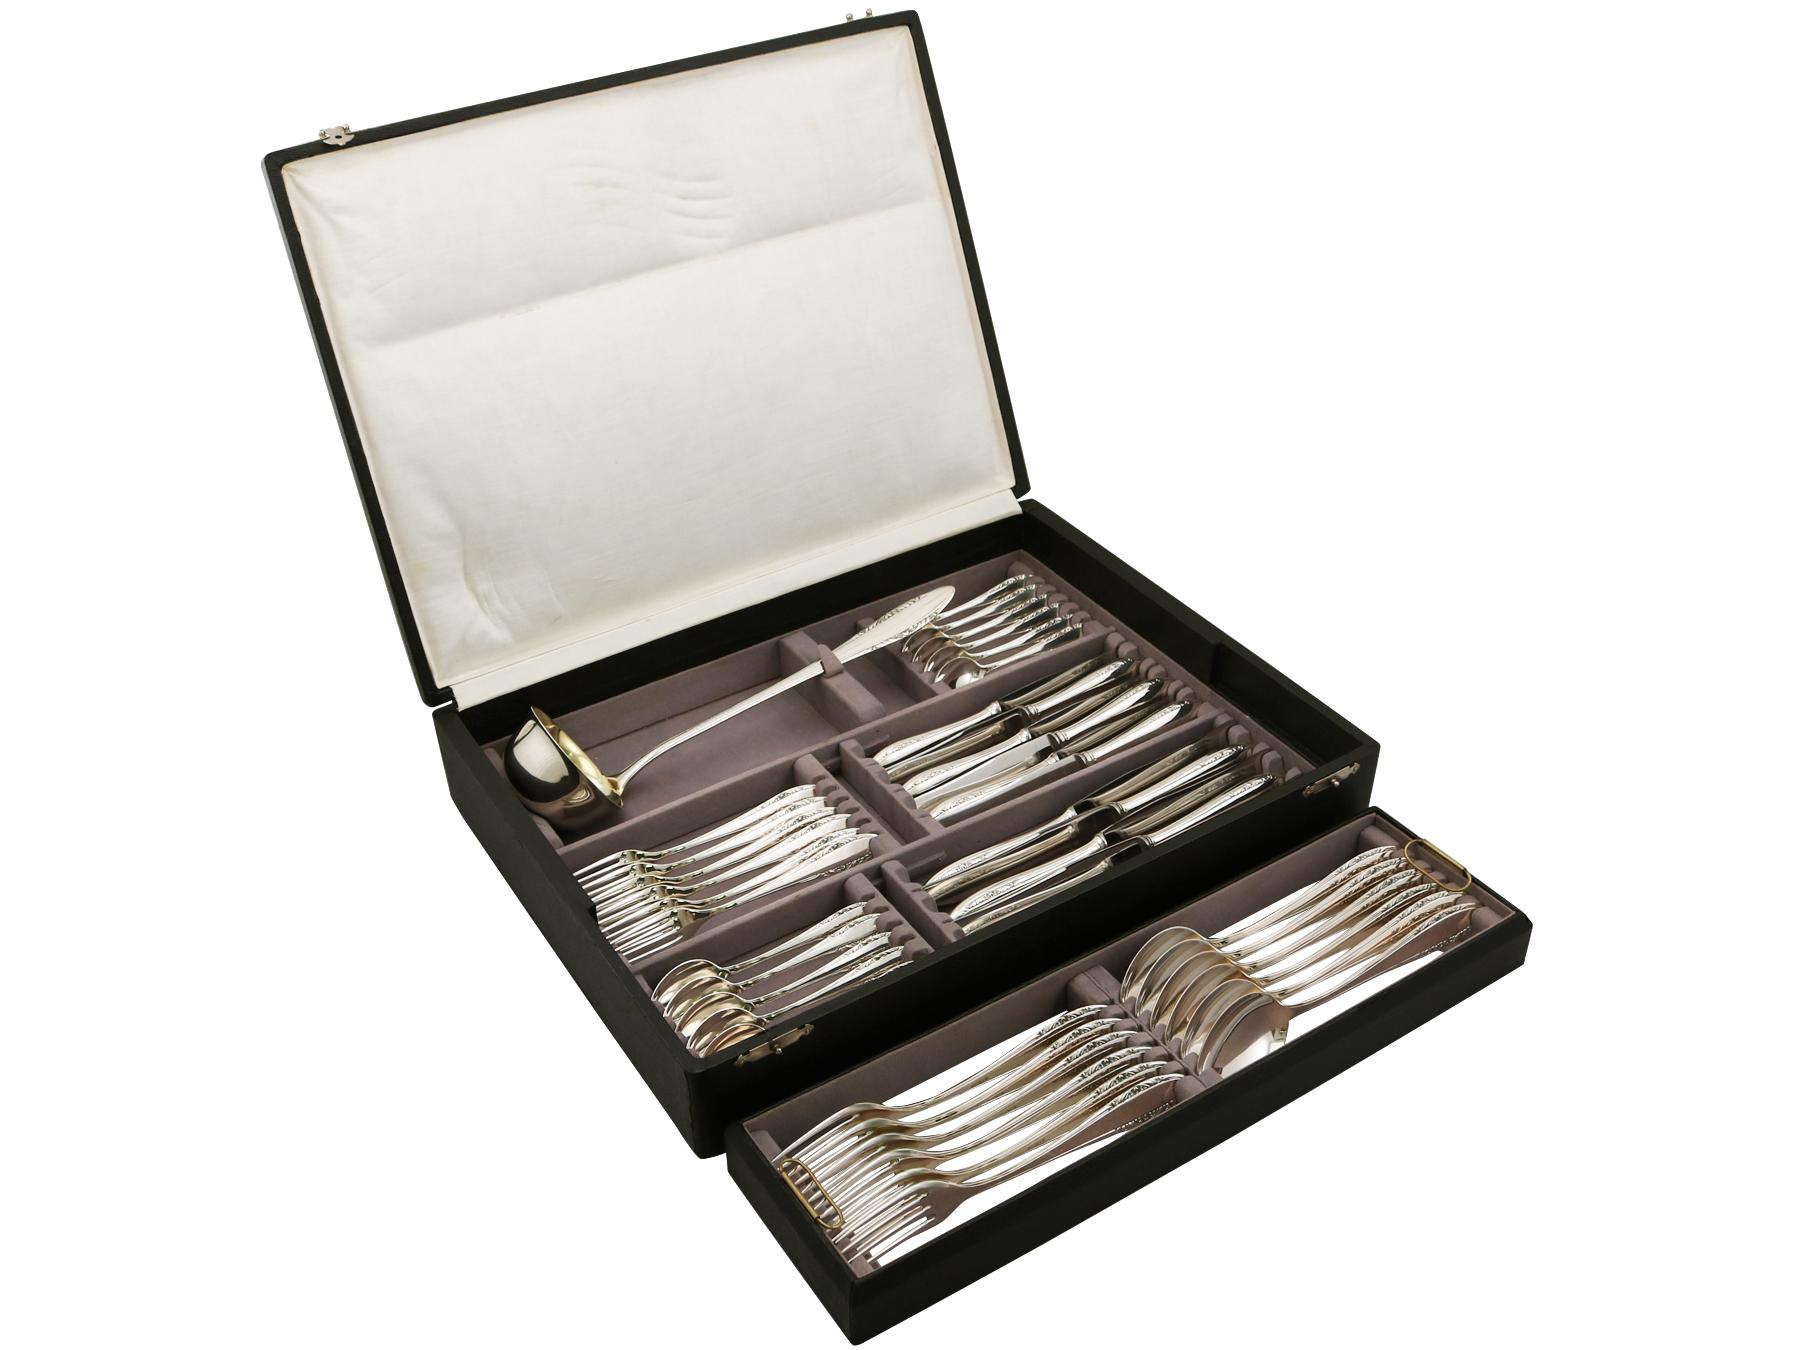 A fine and impressive antique German silver straight flatware service for six persons - boxed; an addition to our canteen of cutlery collection.

The pieces of this fine, antique German silver flatware service for six persons have a plain rounded